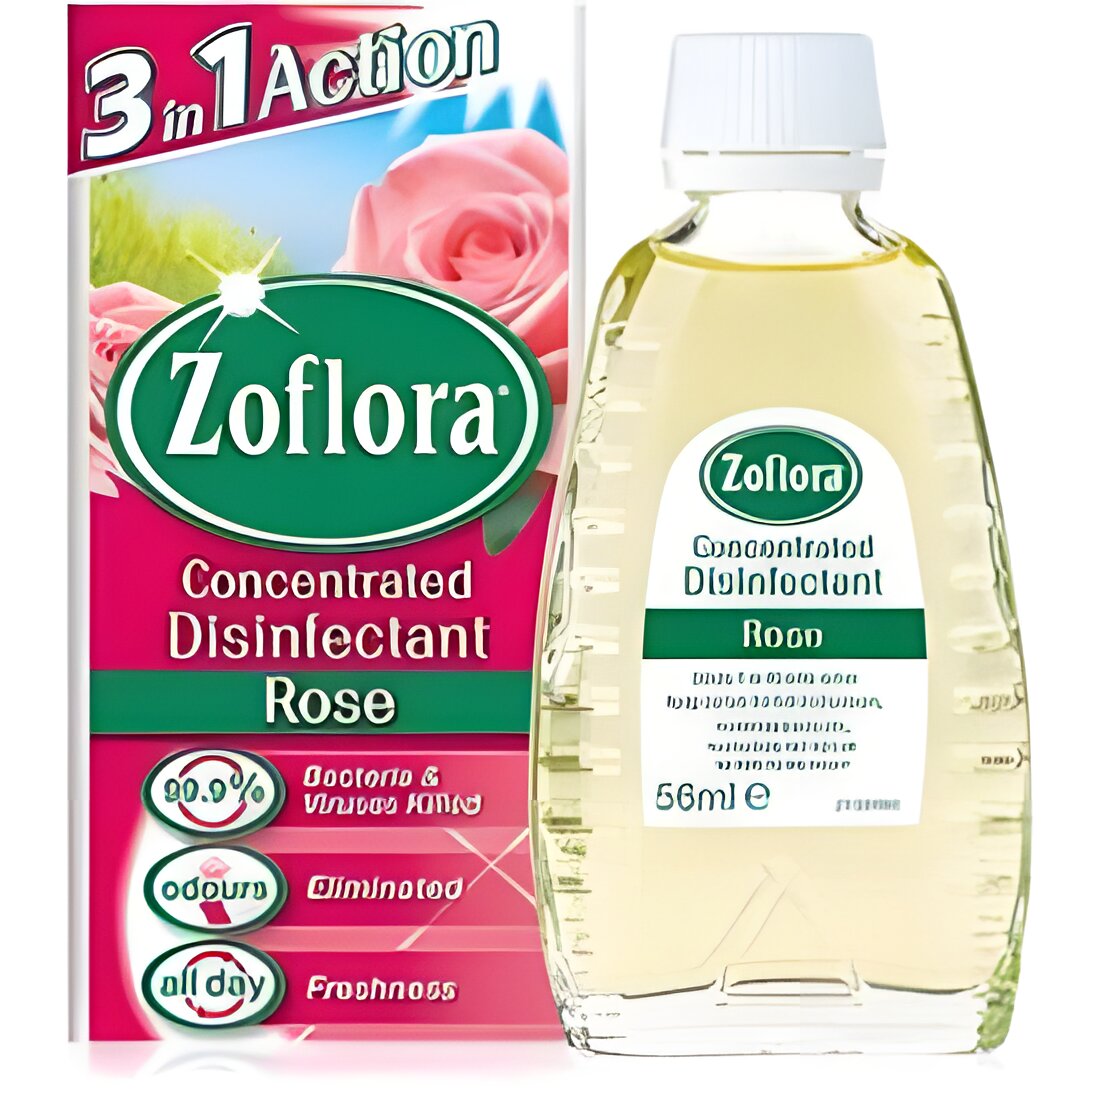 Free Zoflora Concentrated Disinfectant